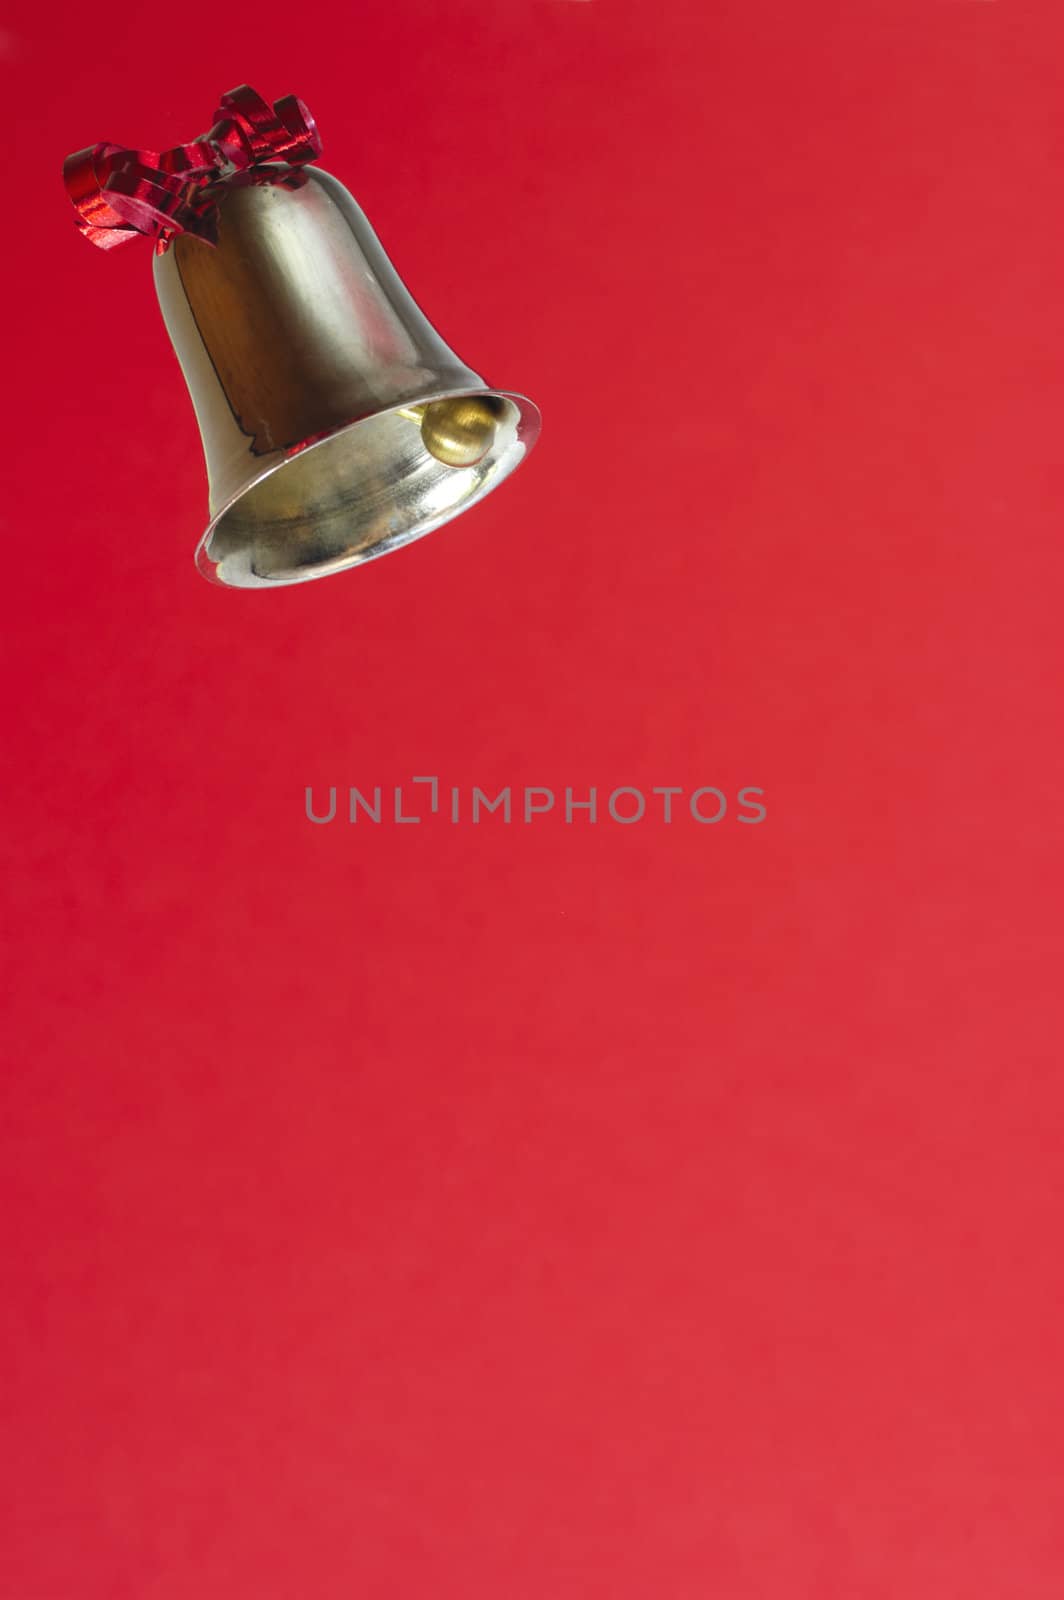 Ringing bell on red background by Bateleur